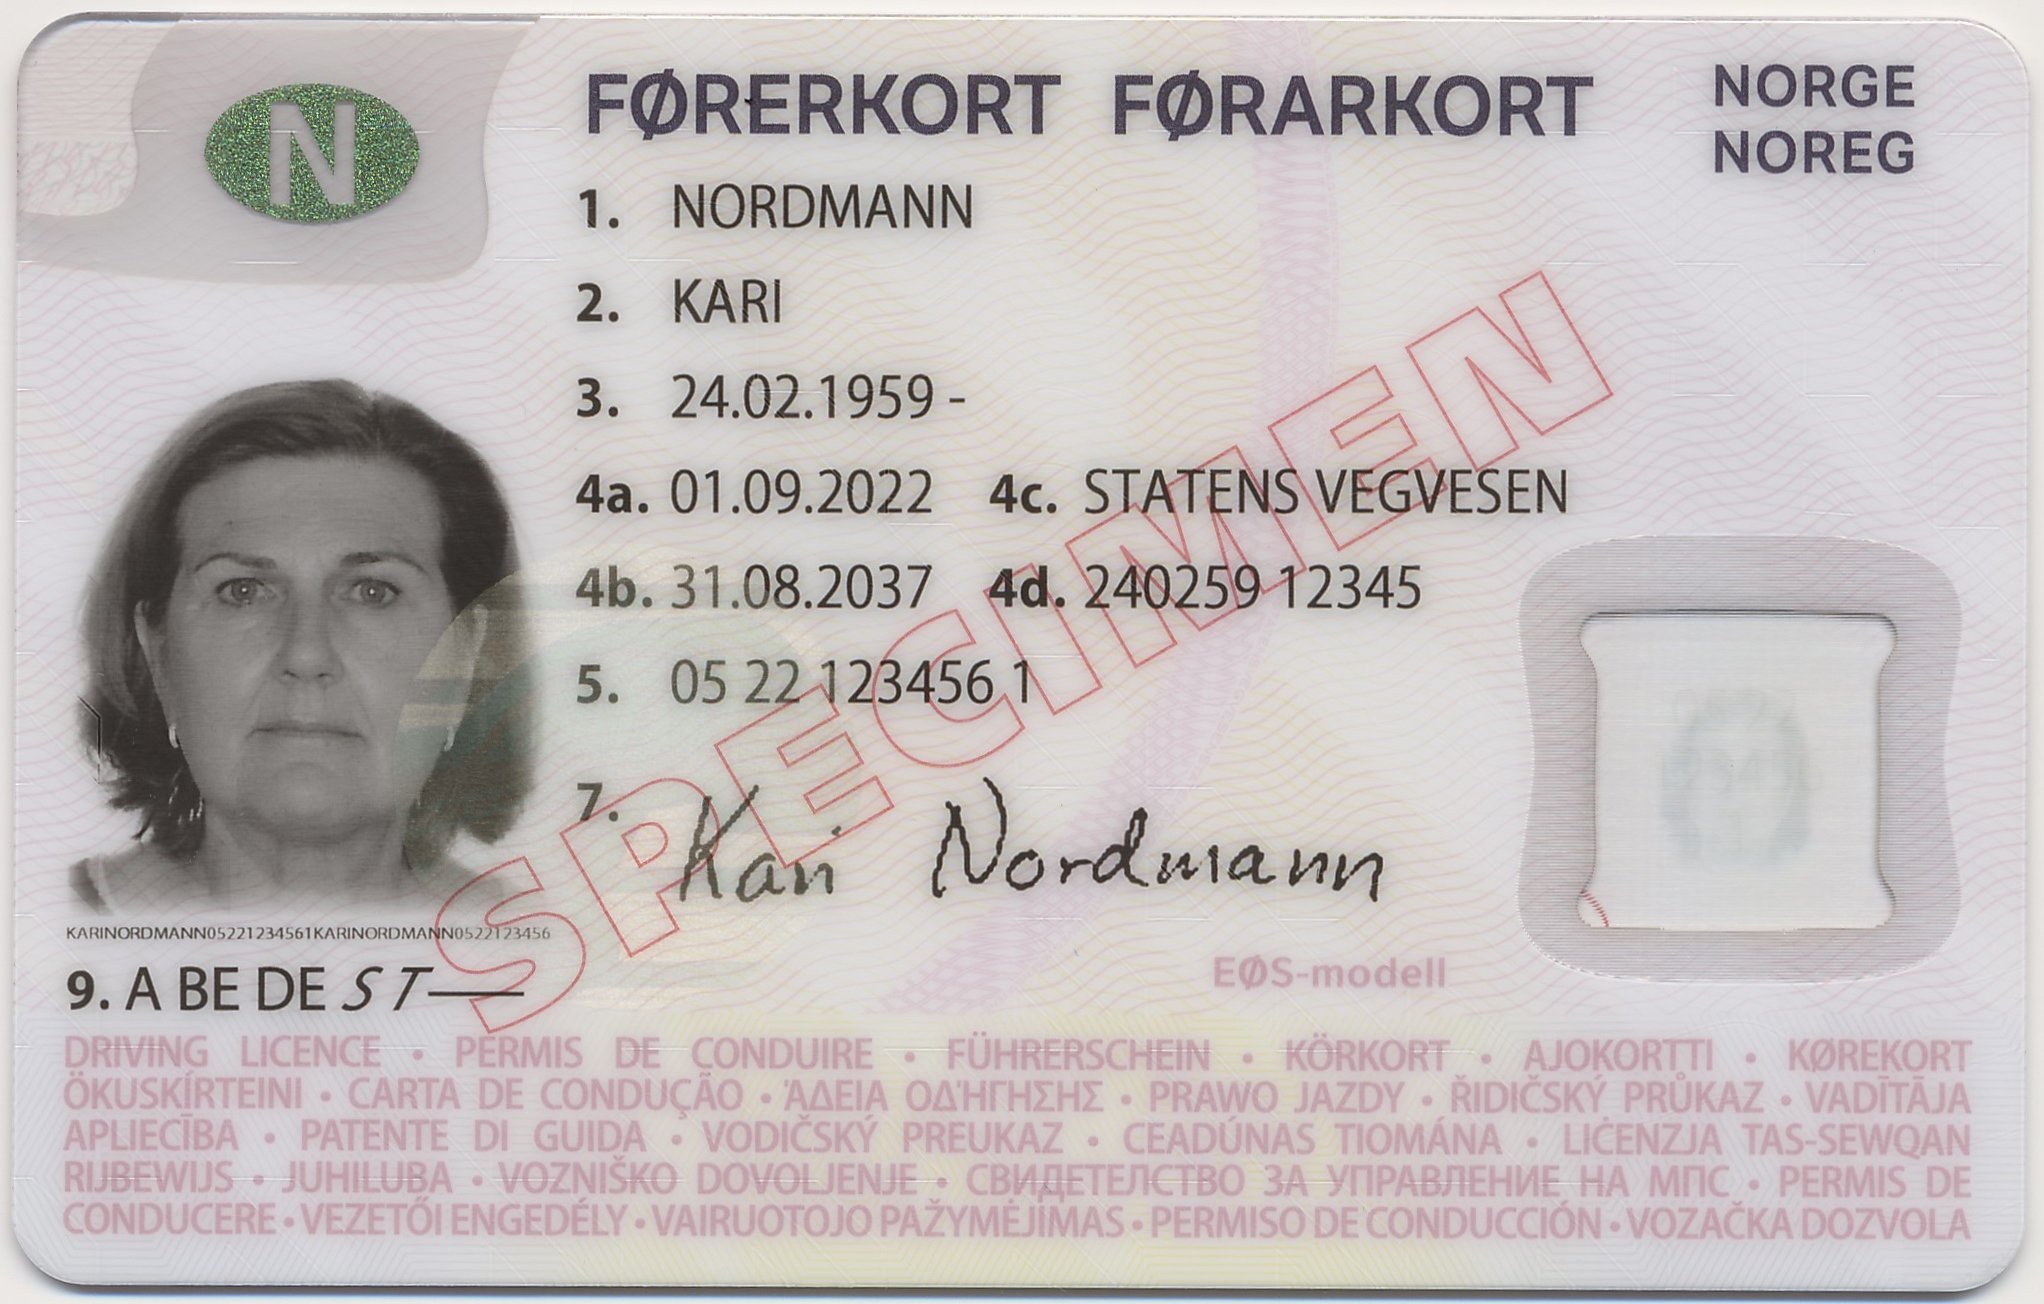 Norway to introduce new driving licence design from September